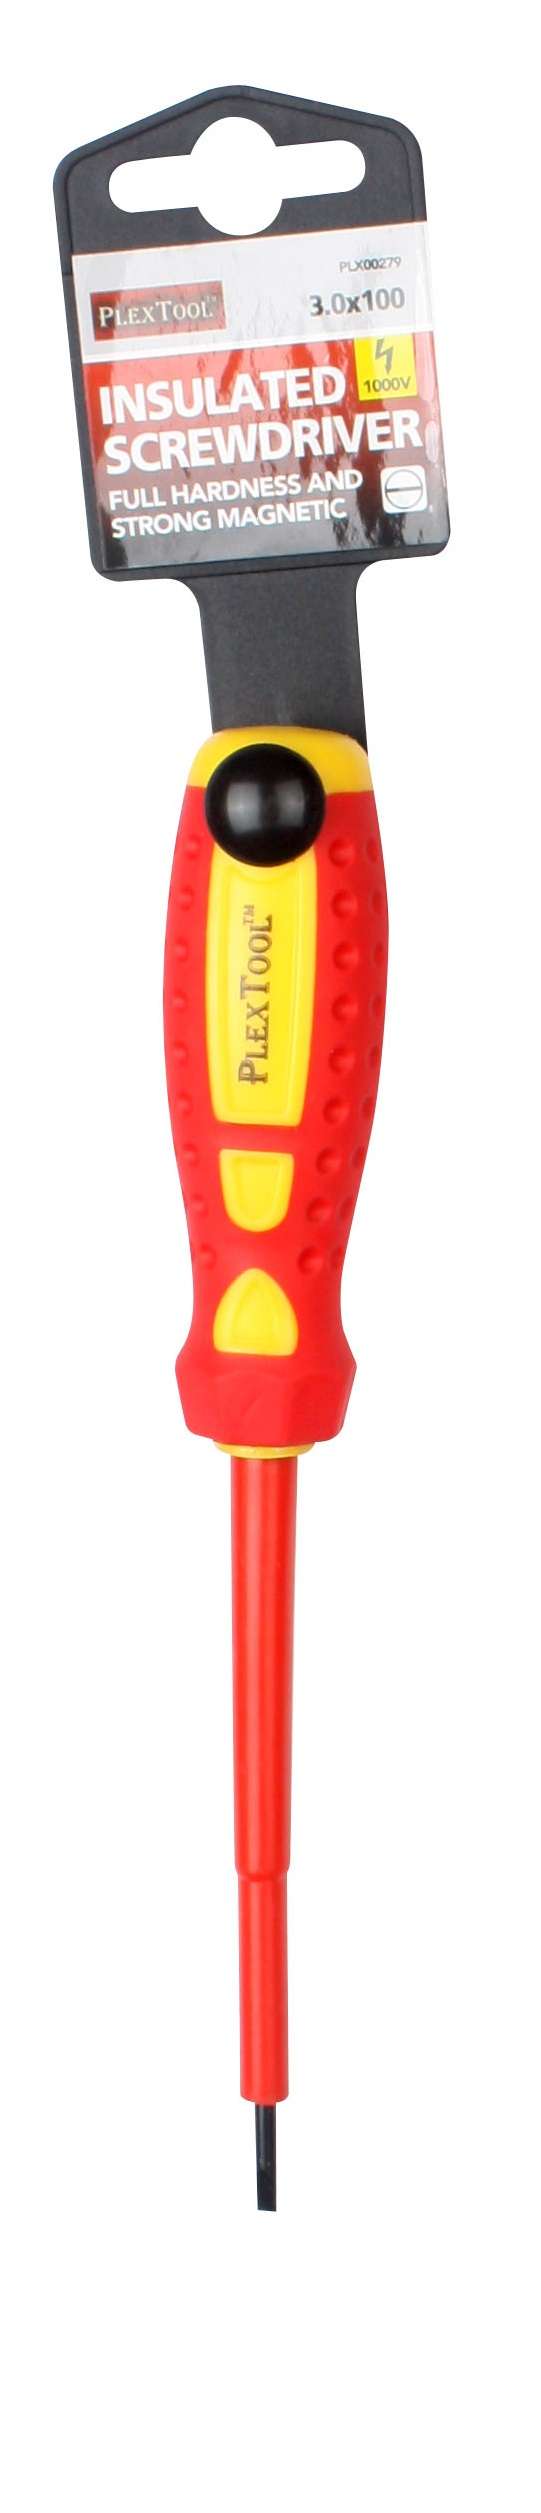 4"L x 1/8" Slotted Full Hardness Strong Magnetic Insulated Screwdriver - 1